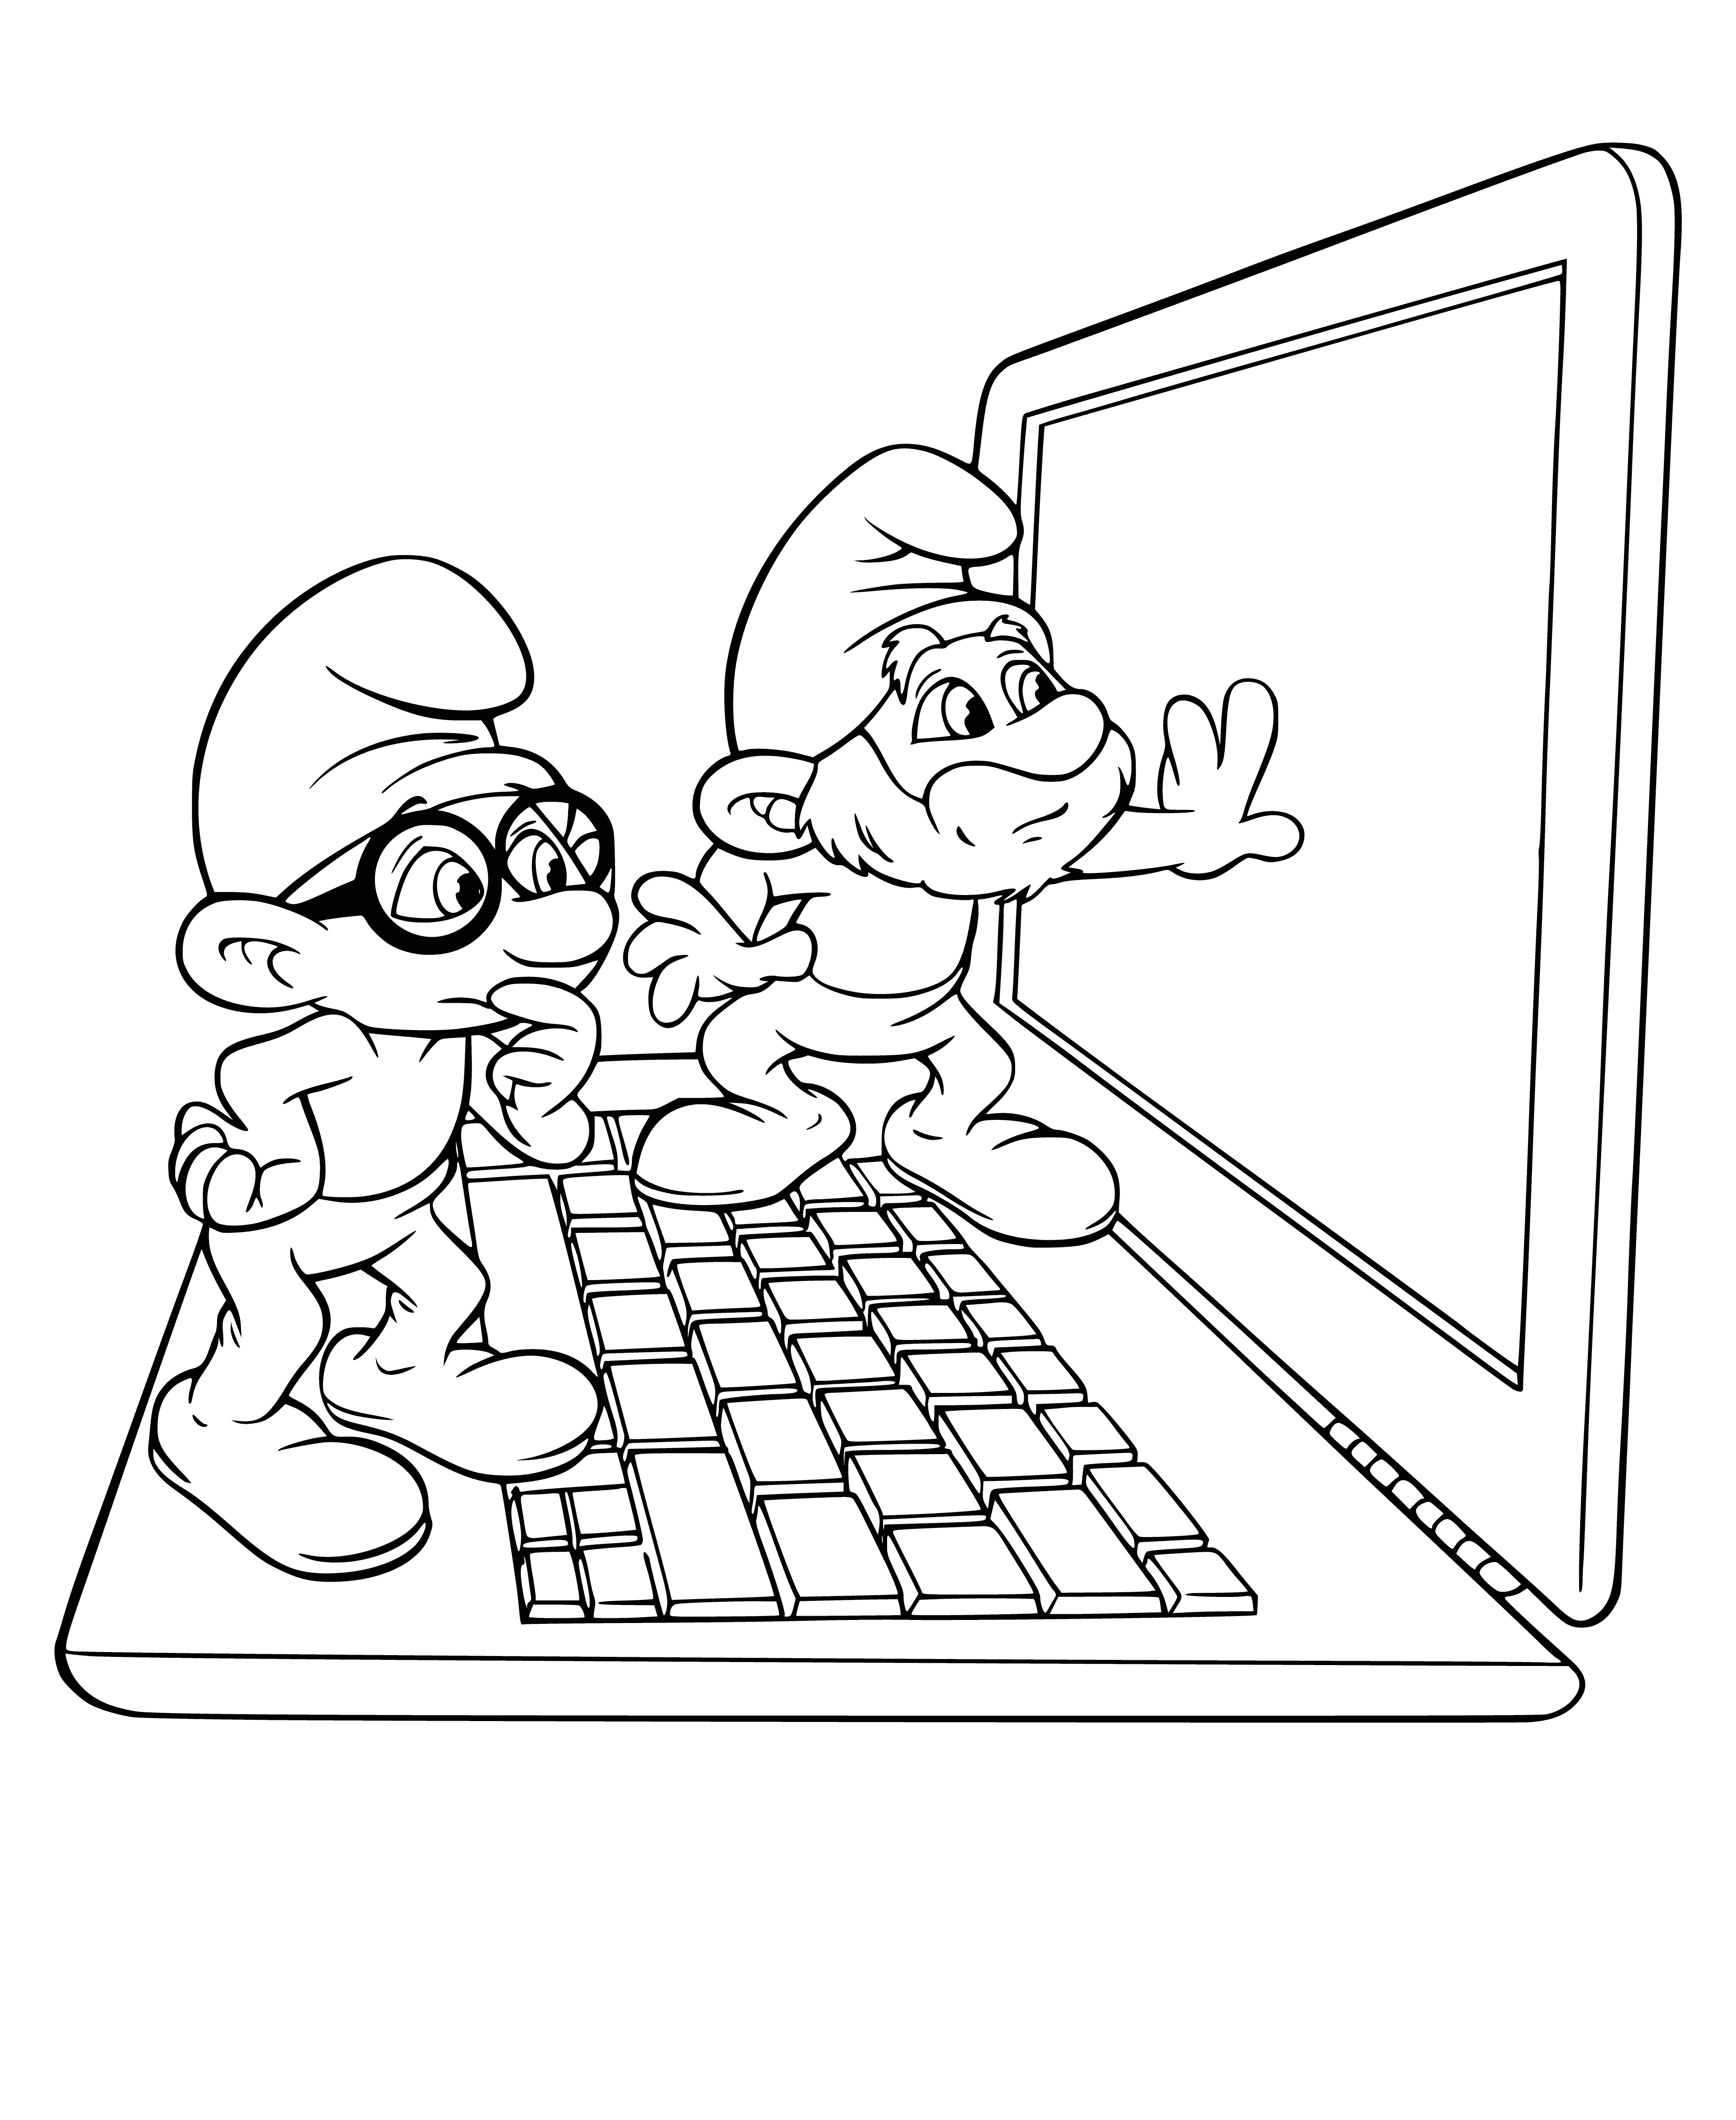 The prudent and Pope Smurf coloring page